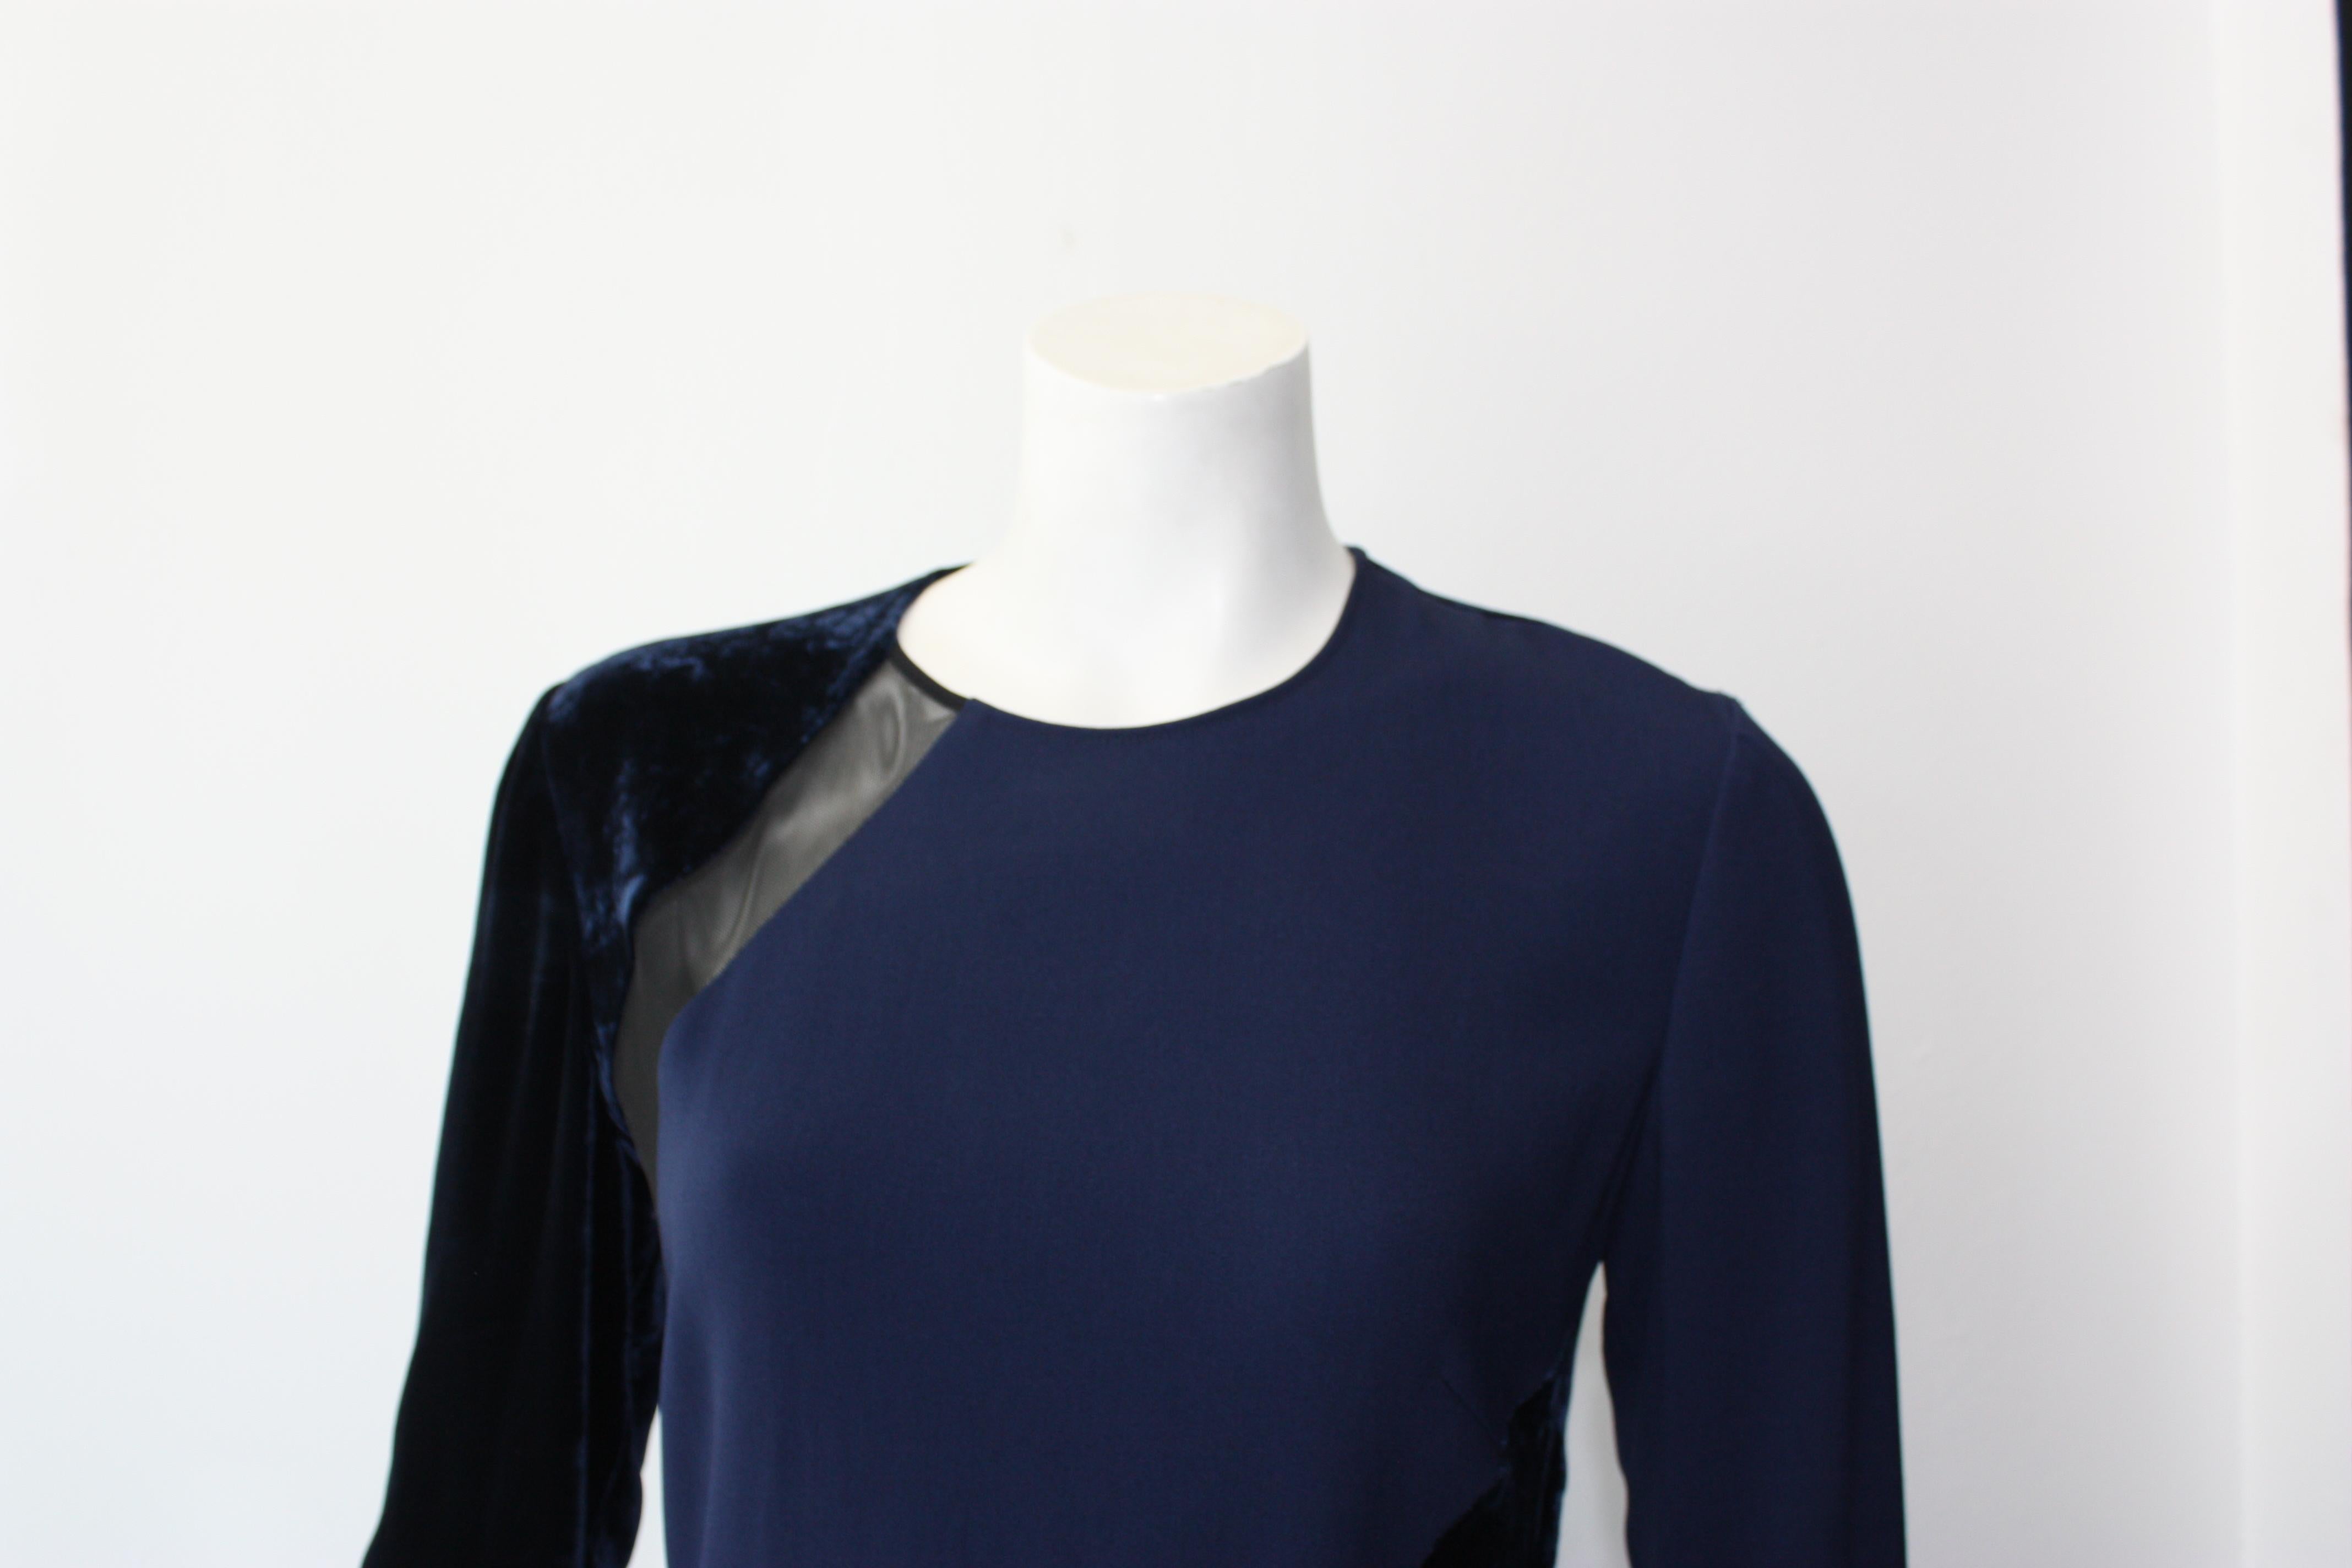 Stella McCartney long sleeve velvet and mesh navy gown. Contrasting navy toned panels. Concealed back zipper.

New with tags.
Size IT 42 (fits like a US 6) 